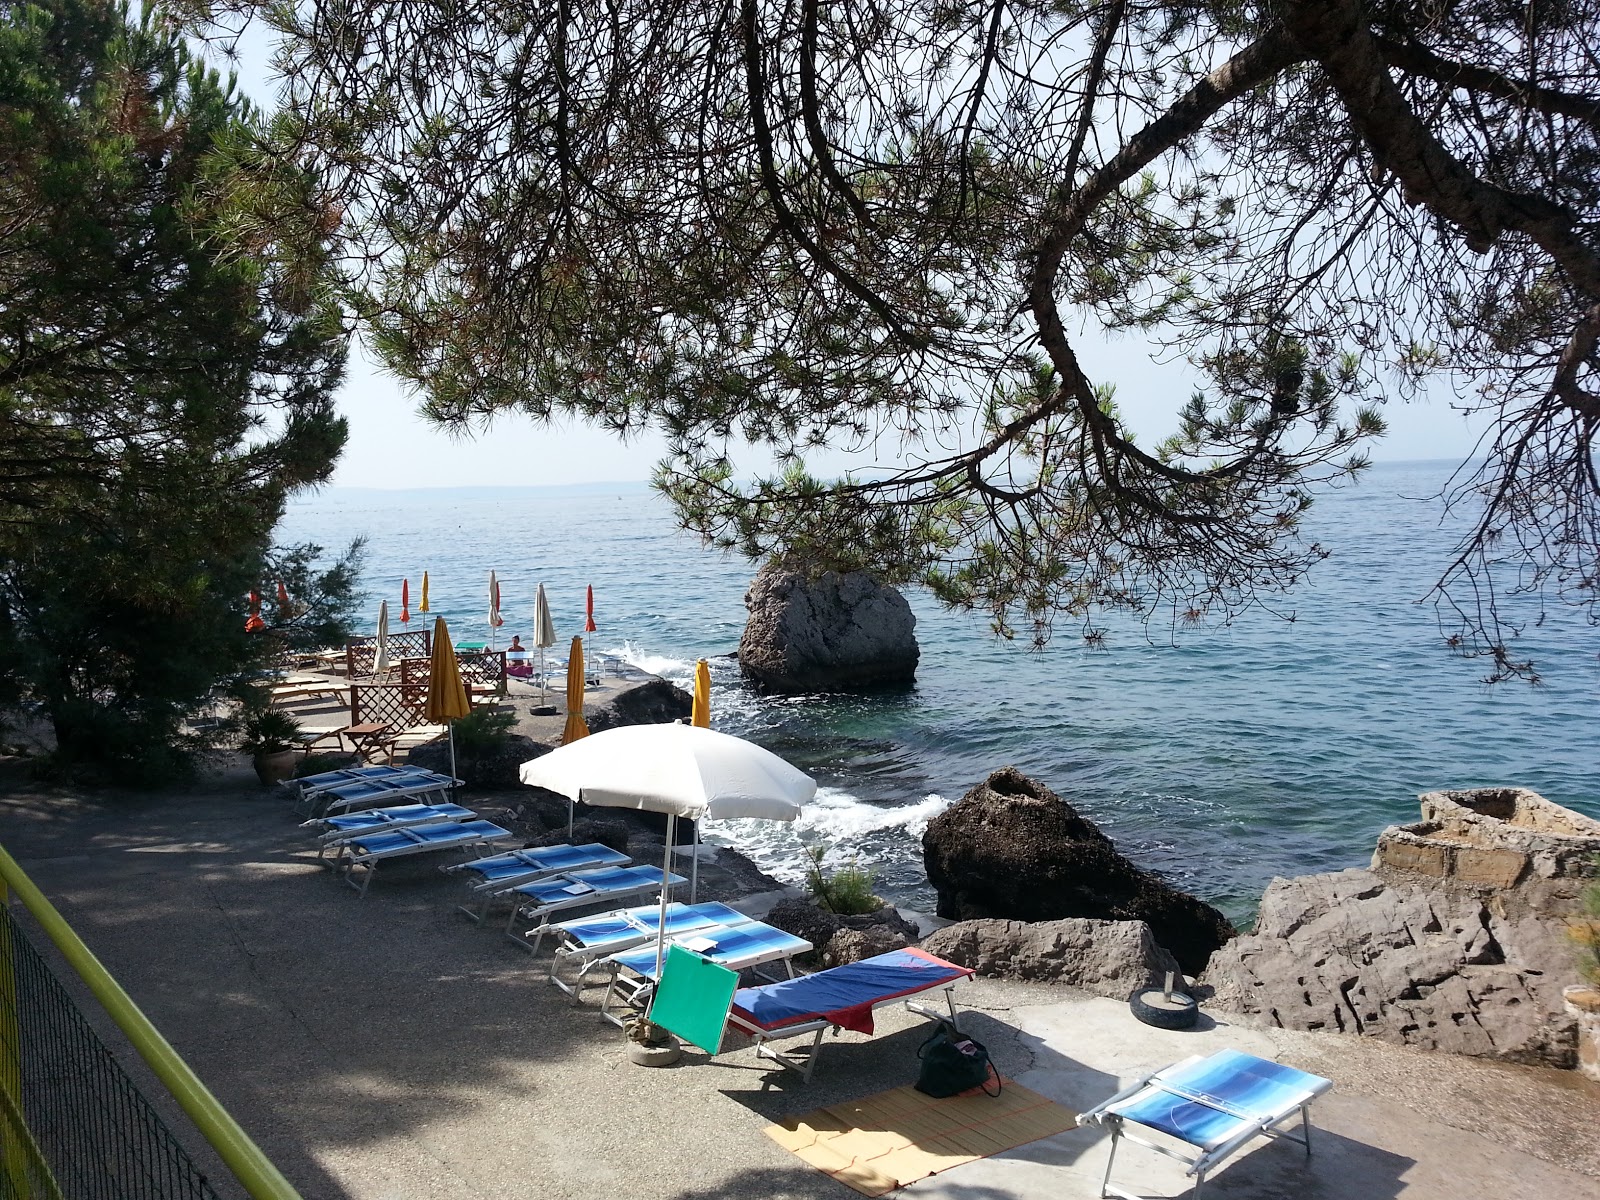 Photo of Spiaggia delle Ginestre - popular place among relax connoisseurs